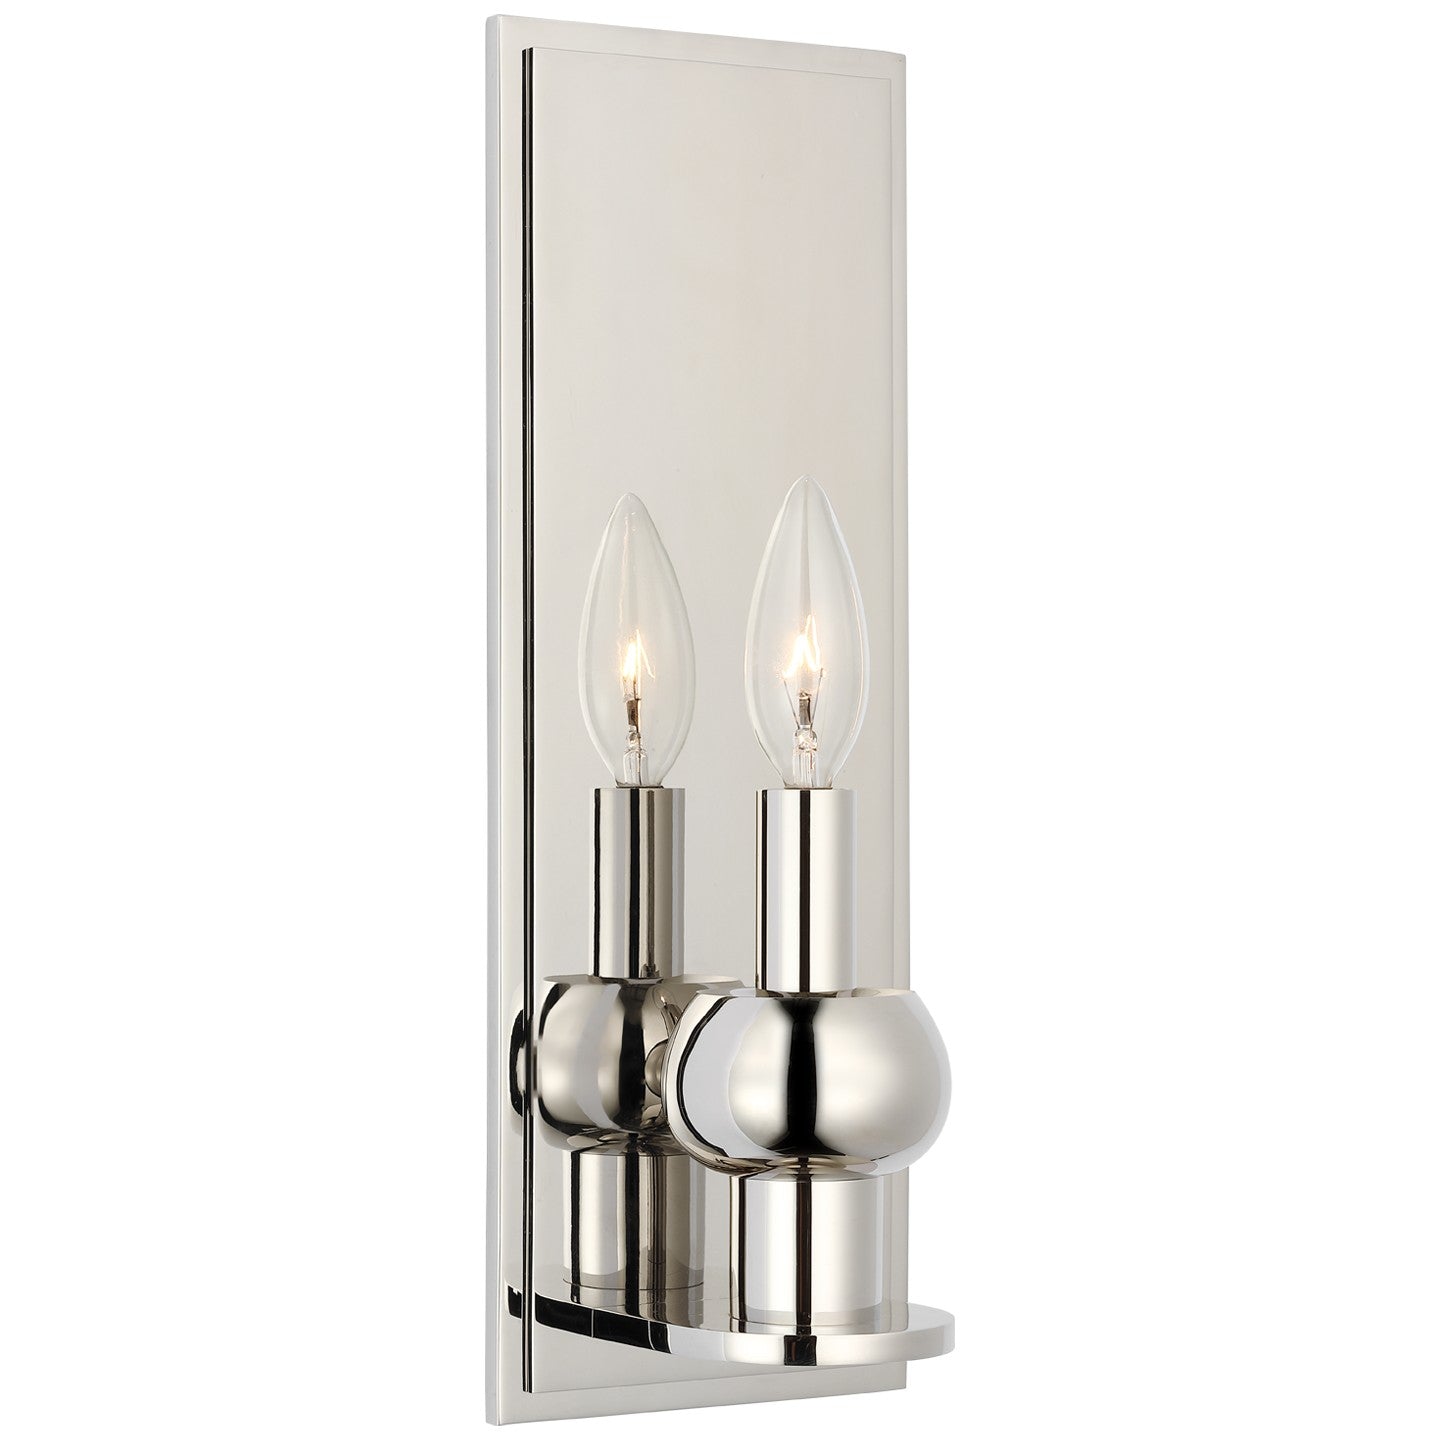 Load image into Gallery viewer, Visual Comfort Signature - PCD 2102PN - LED Wall Sconce - Comtesse - Polished Nickel
